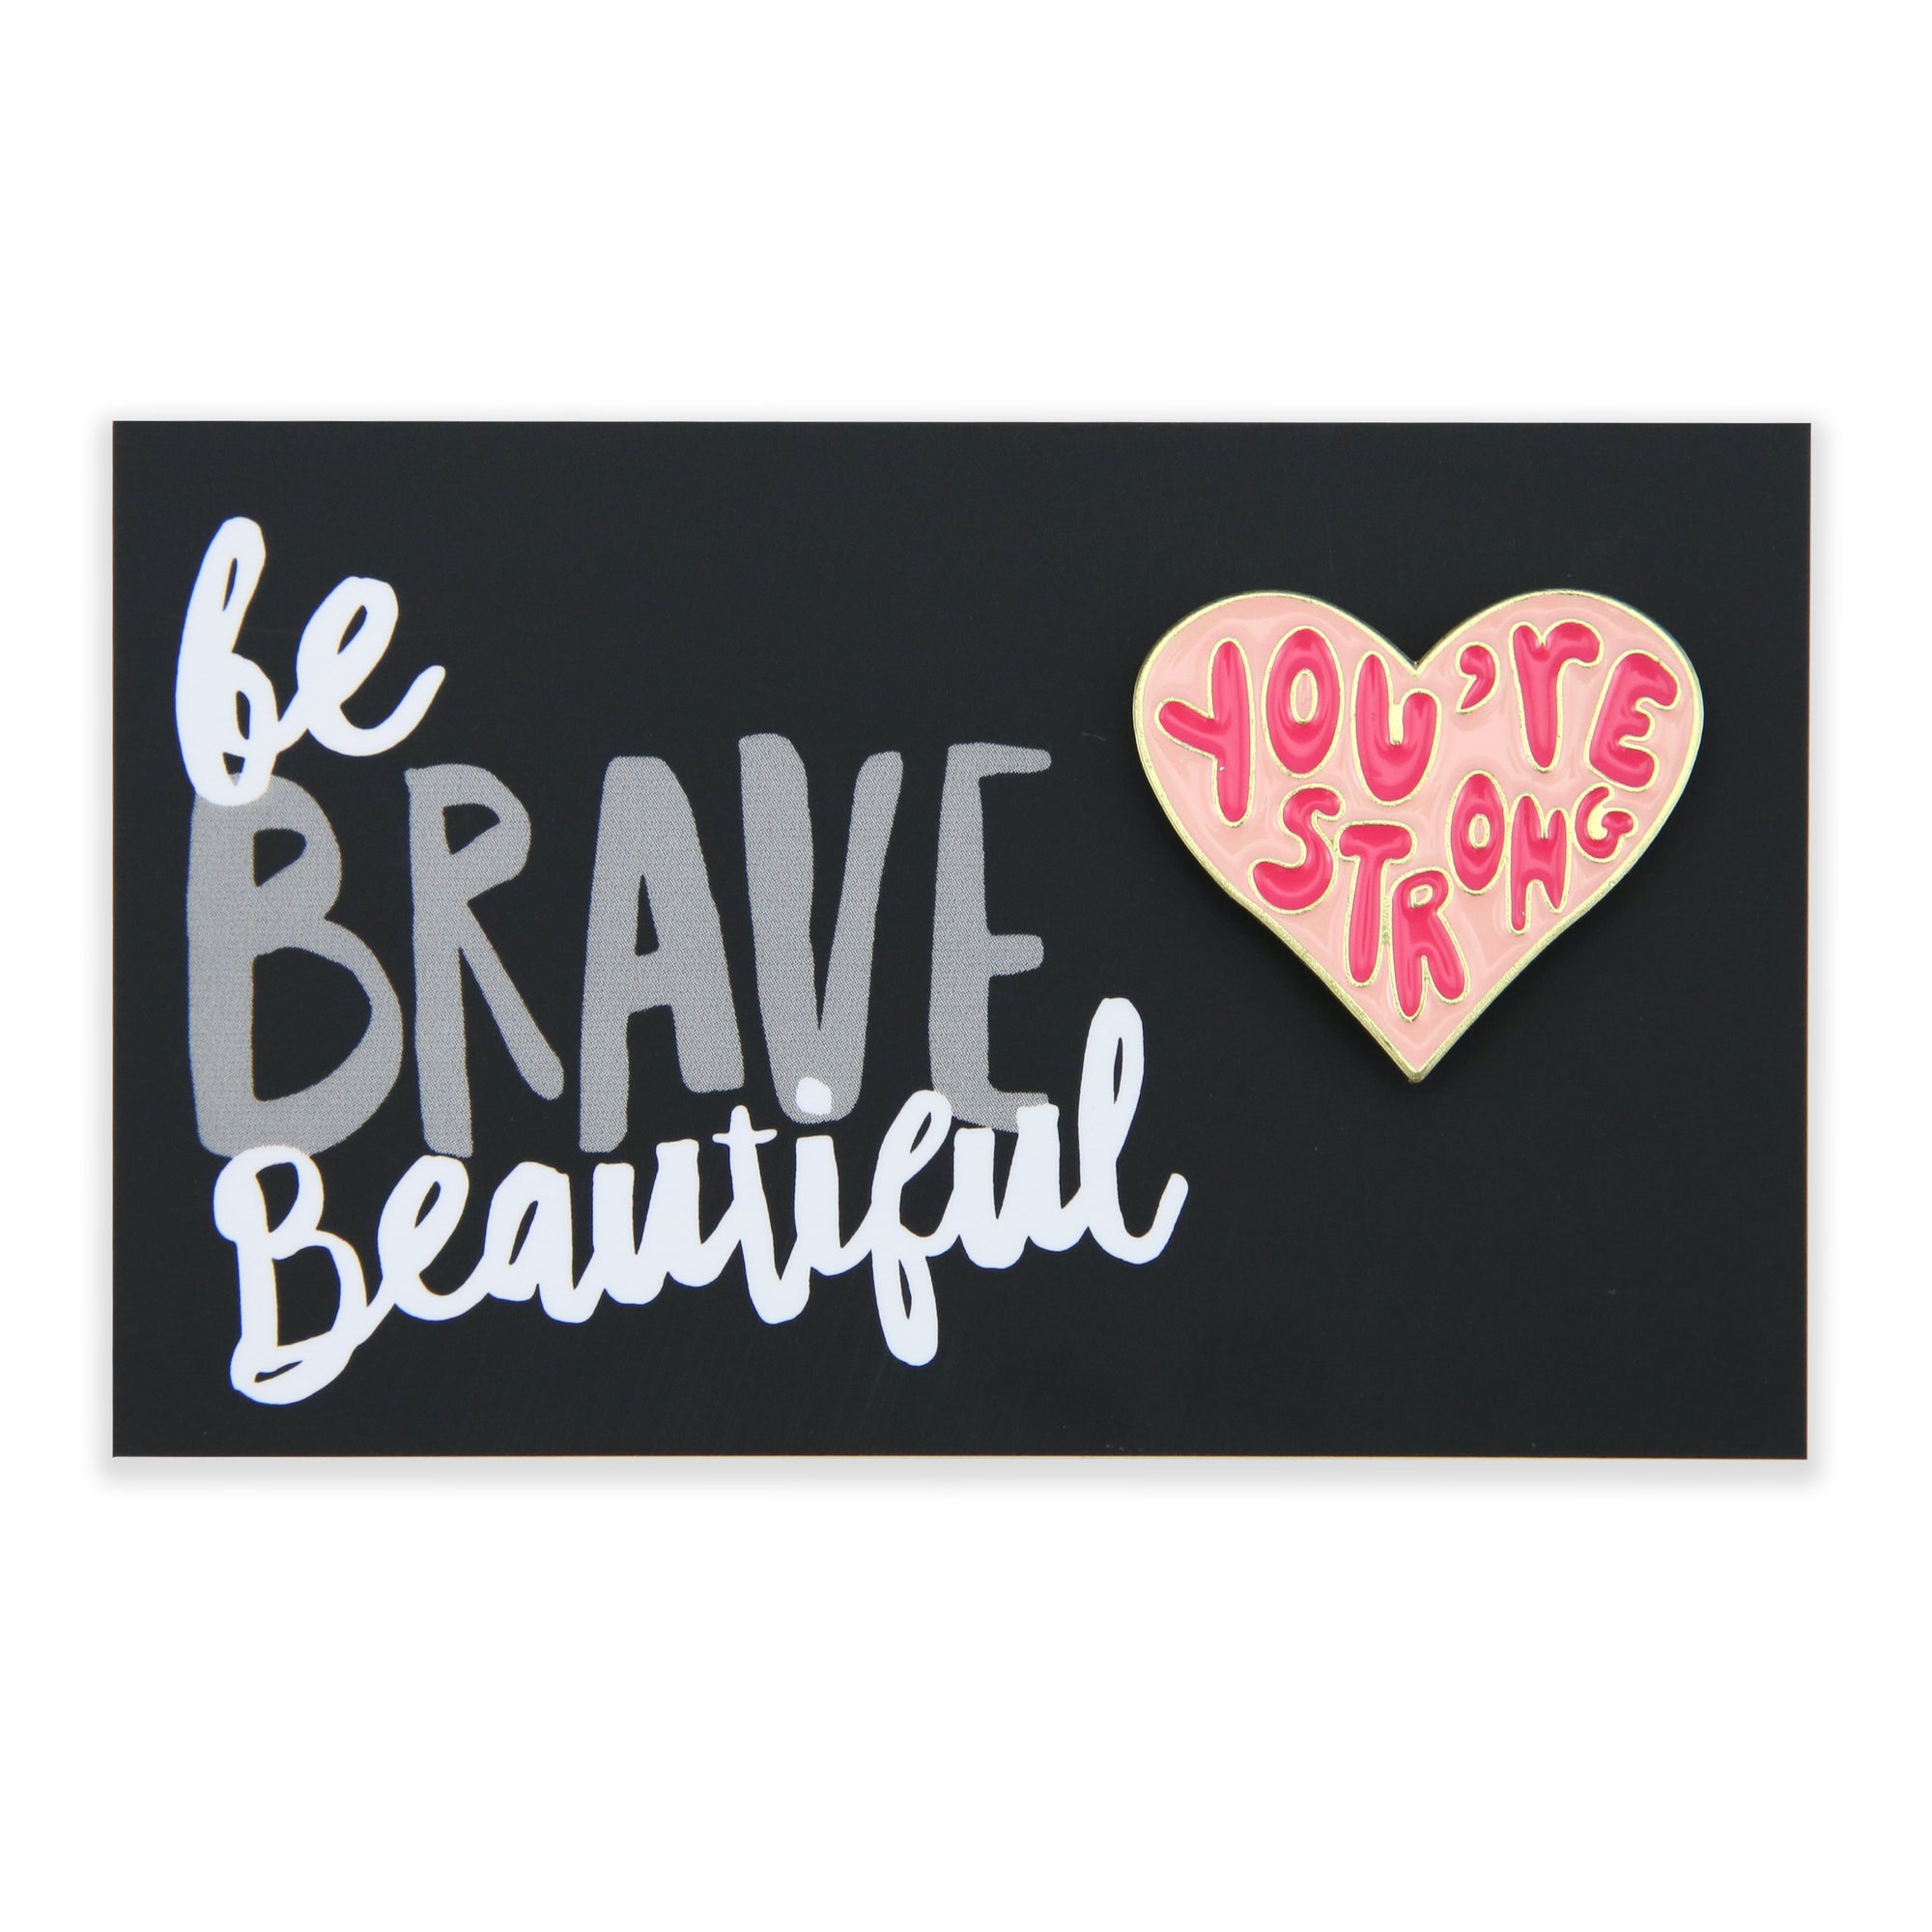 Lovely Pins! Be Brave Beautiful - 'You're Strong' Enamel Badge Pin - (10921)